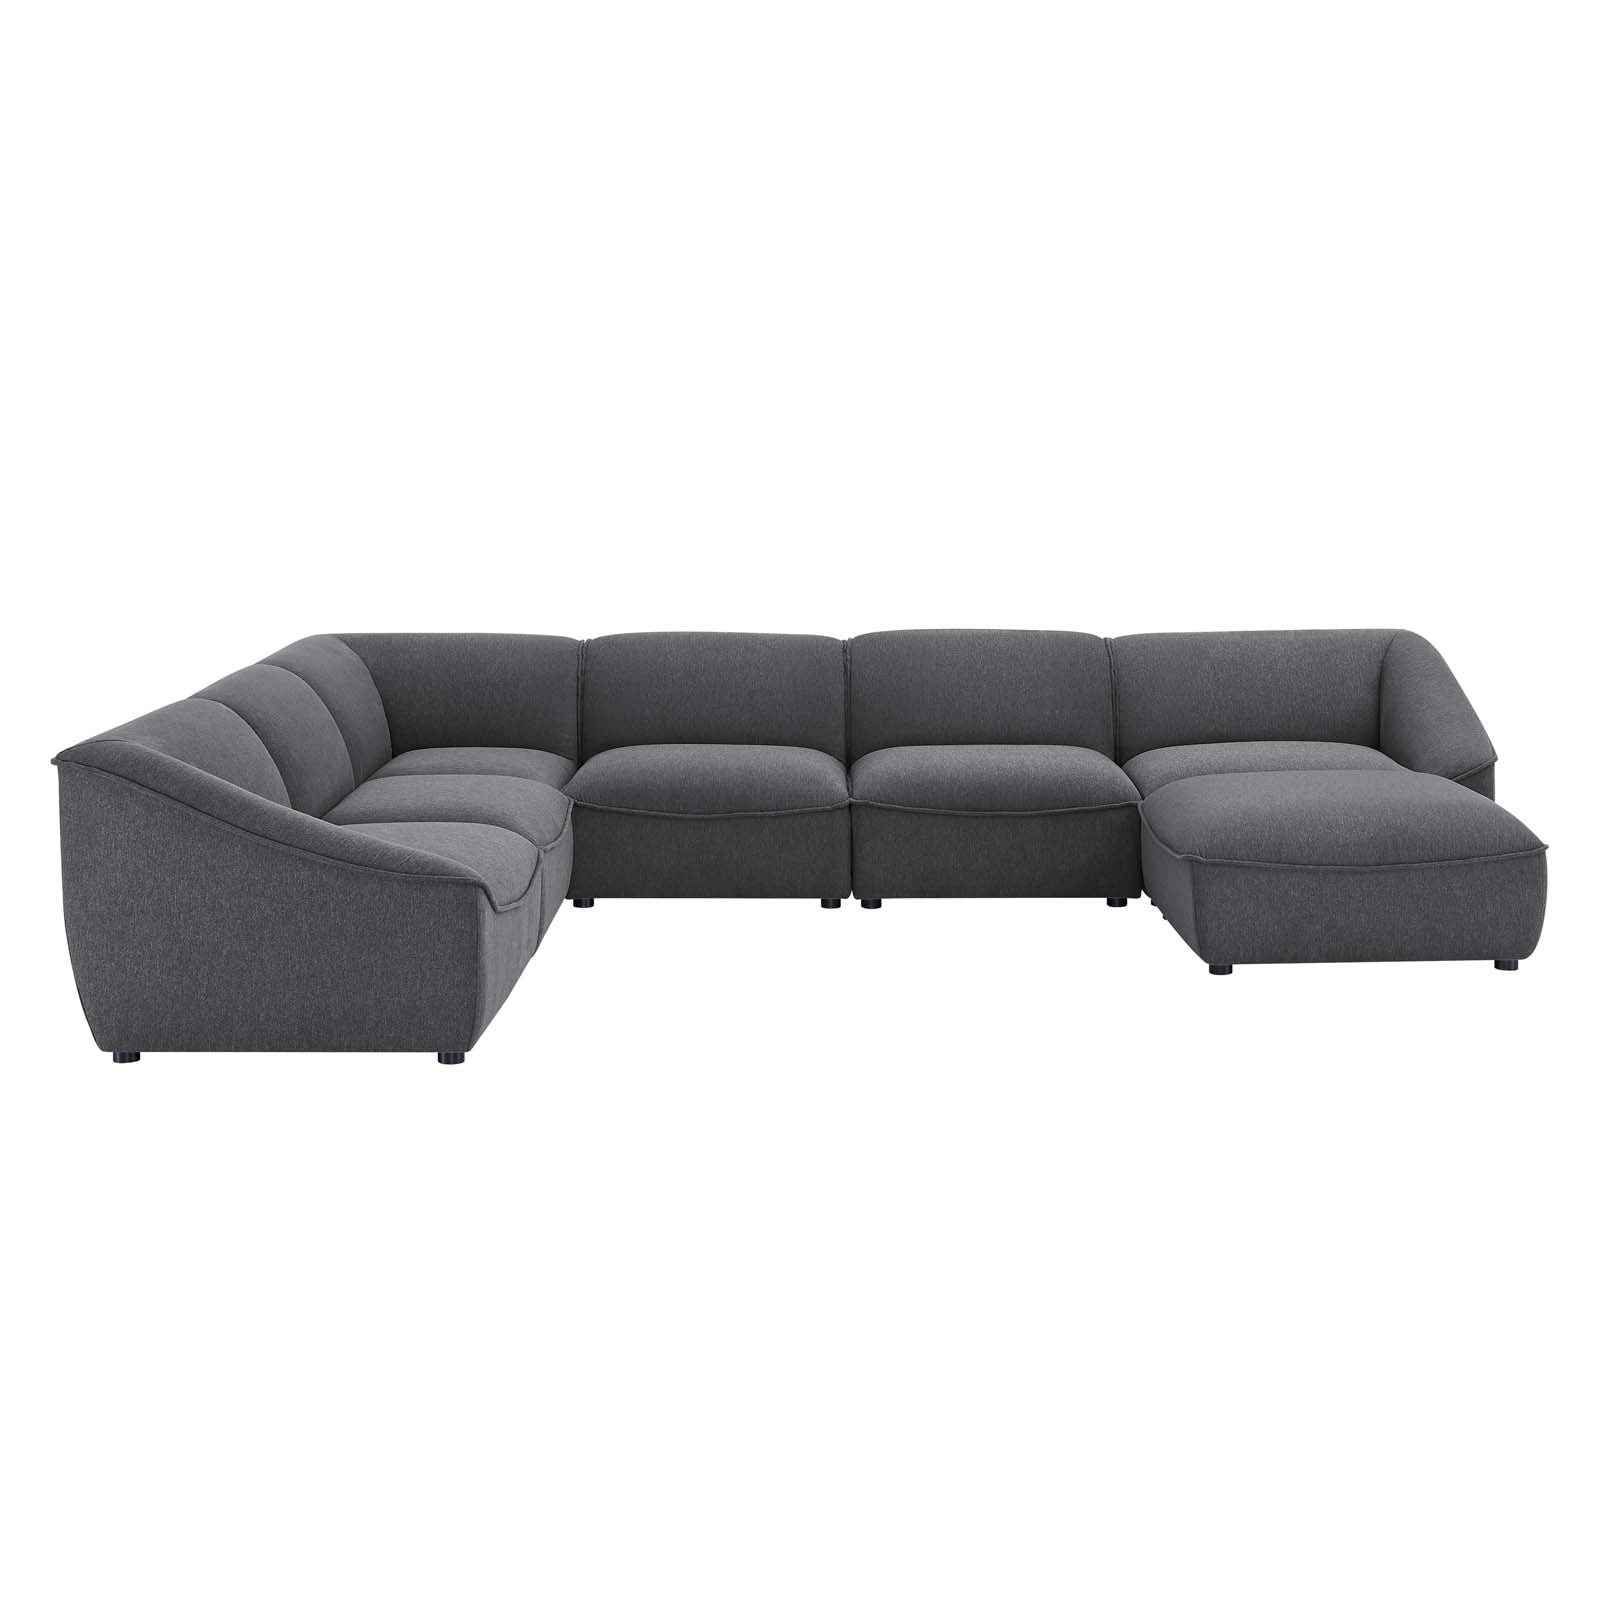 Comprise 7-Piece Sectional Sofa - East Shore Modern Home Furnishings